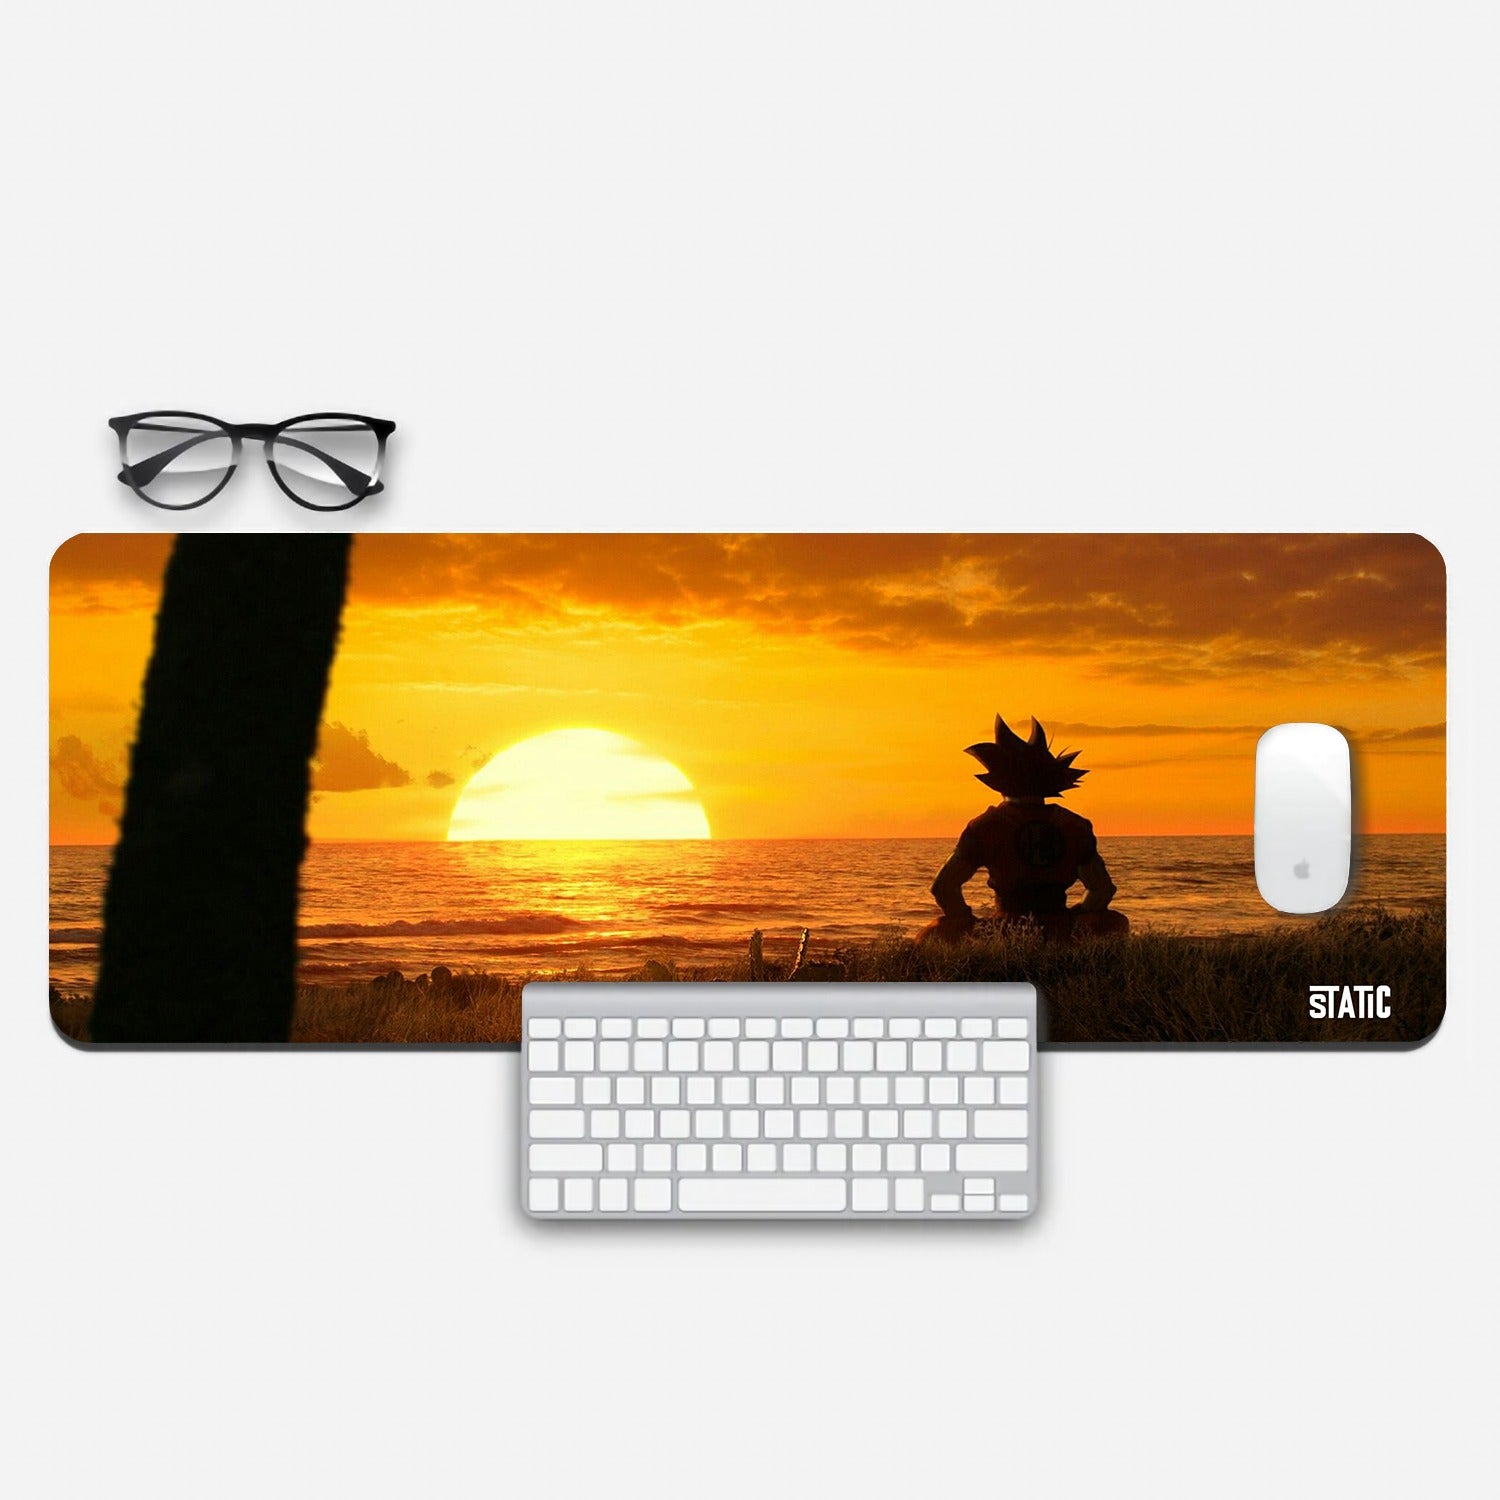 Get Inspired by Goku with Our Extended Gaming Mouse Pad! Immerse yourself in the Dragon Ball world as Goku sits serenely on a beach, silhouetted against a breathtaking sunset. The vivid colors and intricate details make every gaming session an adventure. Crafted for precision and durability, this mouse pad enhances your gaming performance. Elevate your gaming experience - order now!